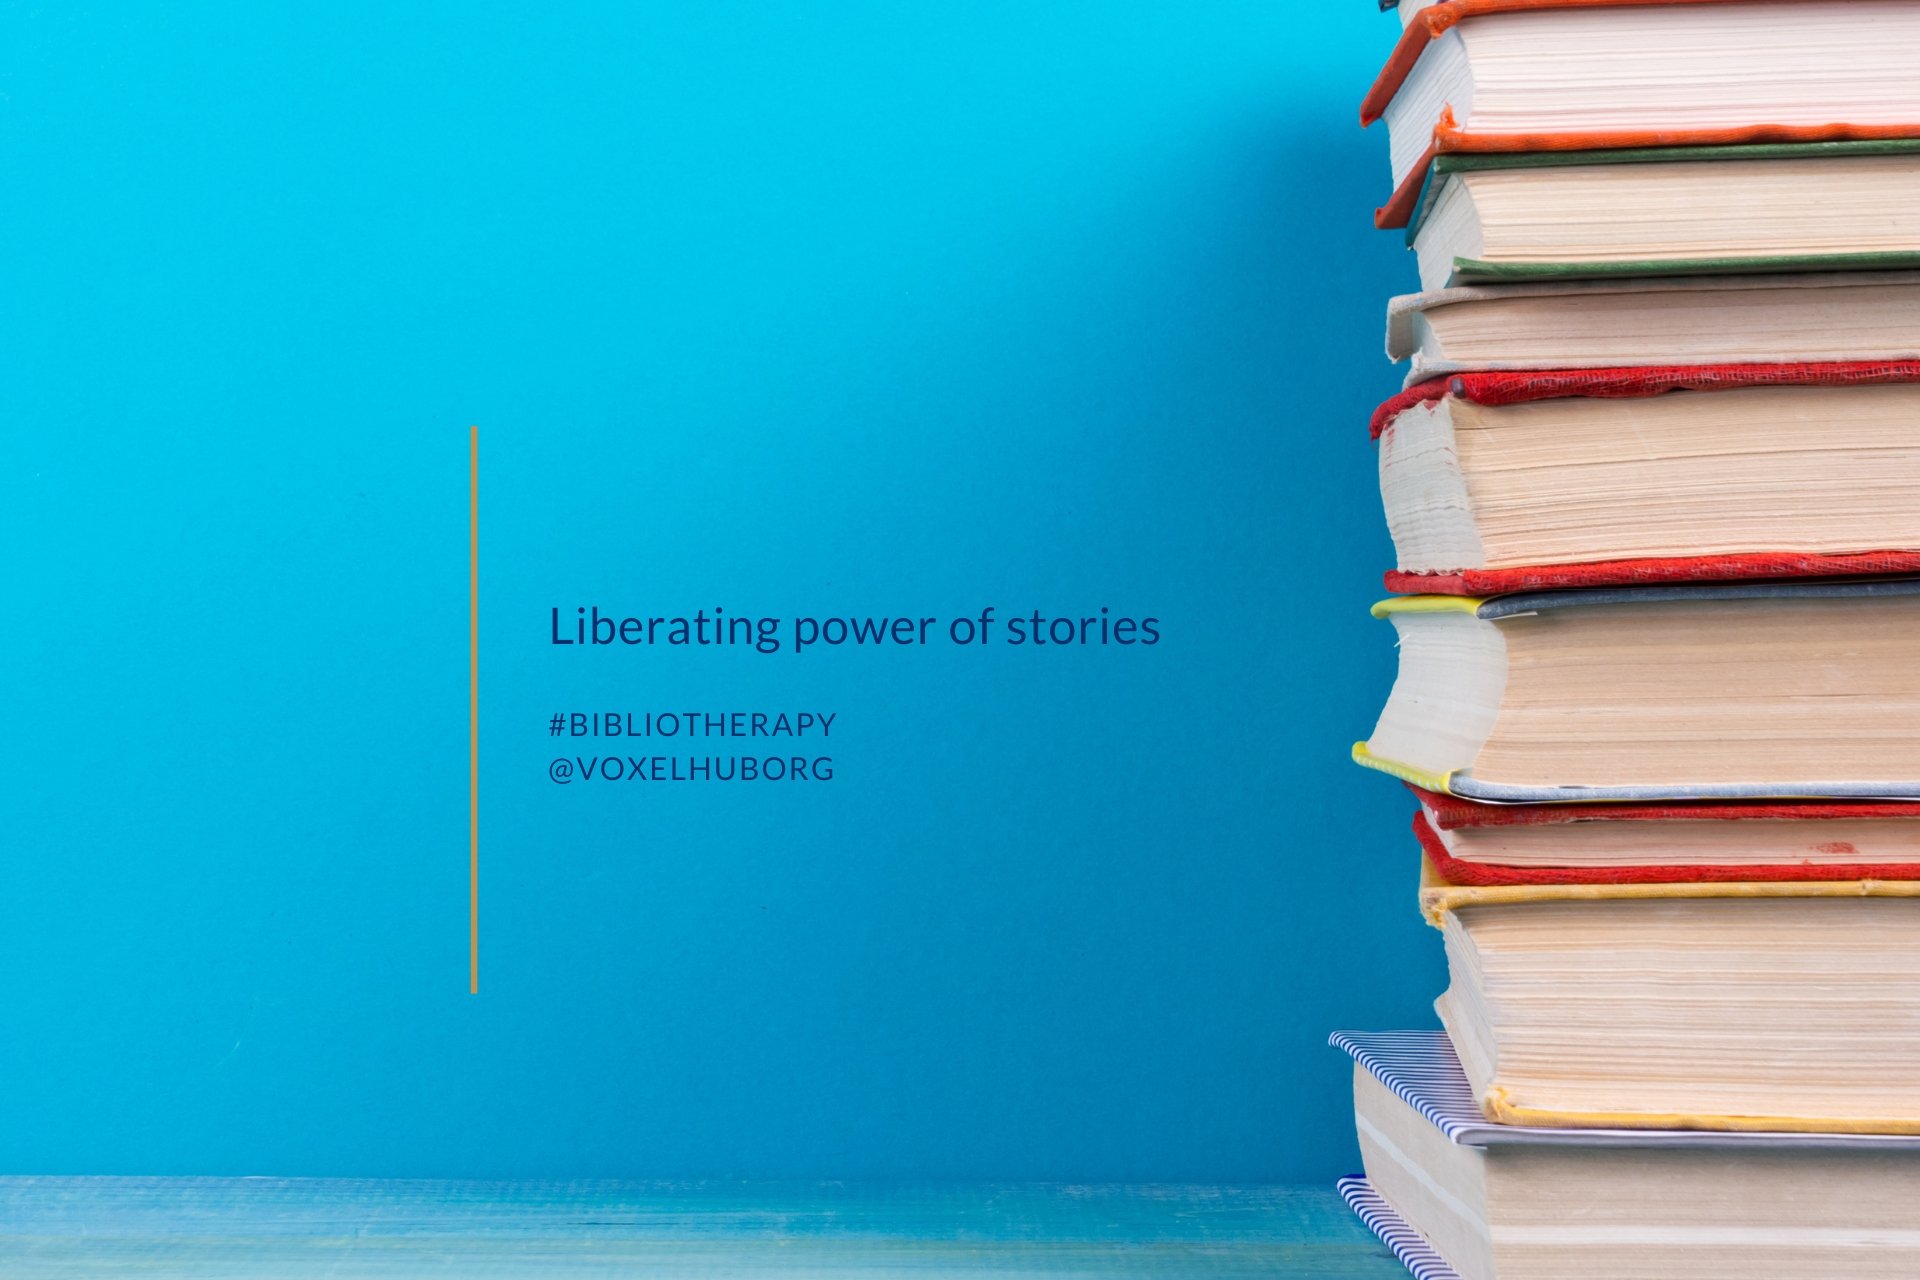 Liberating power of stories 